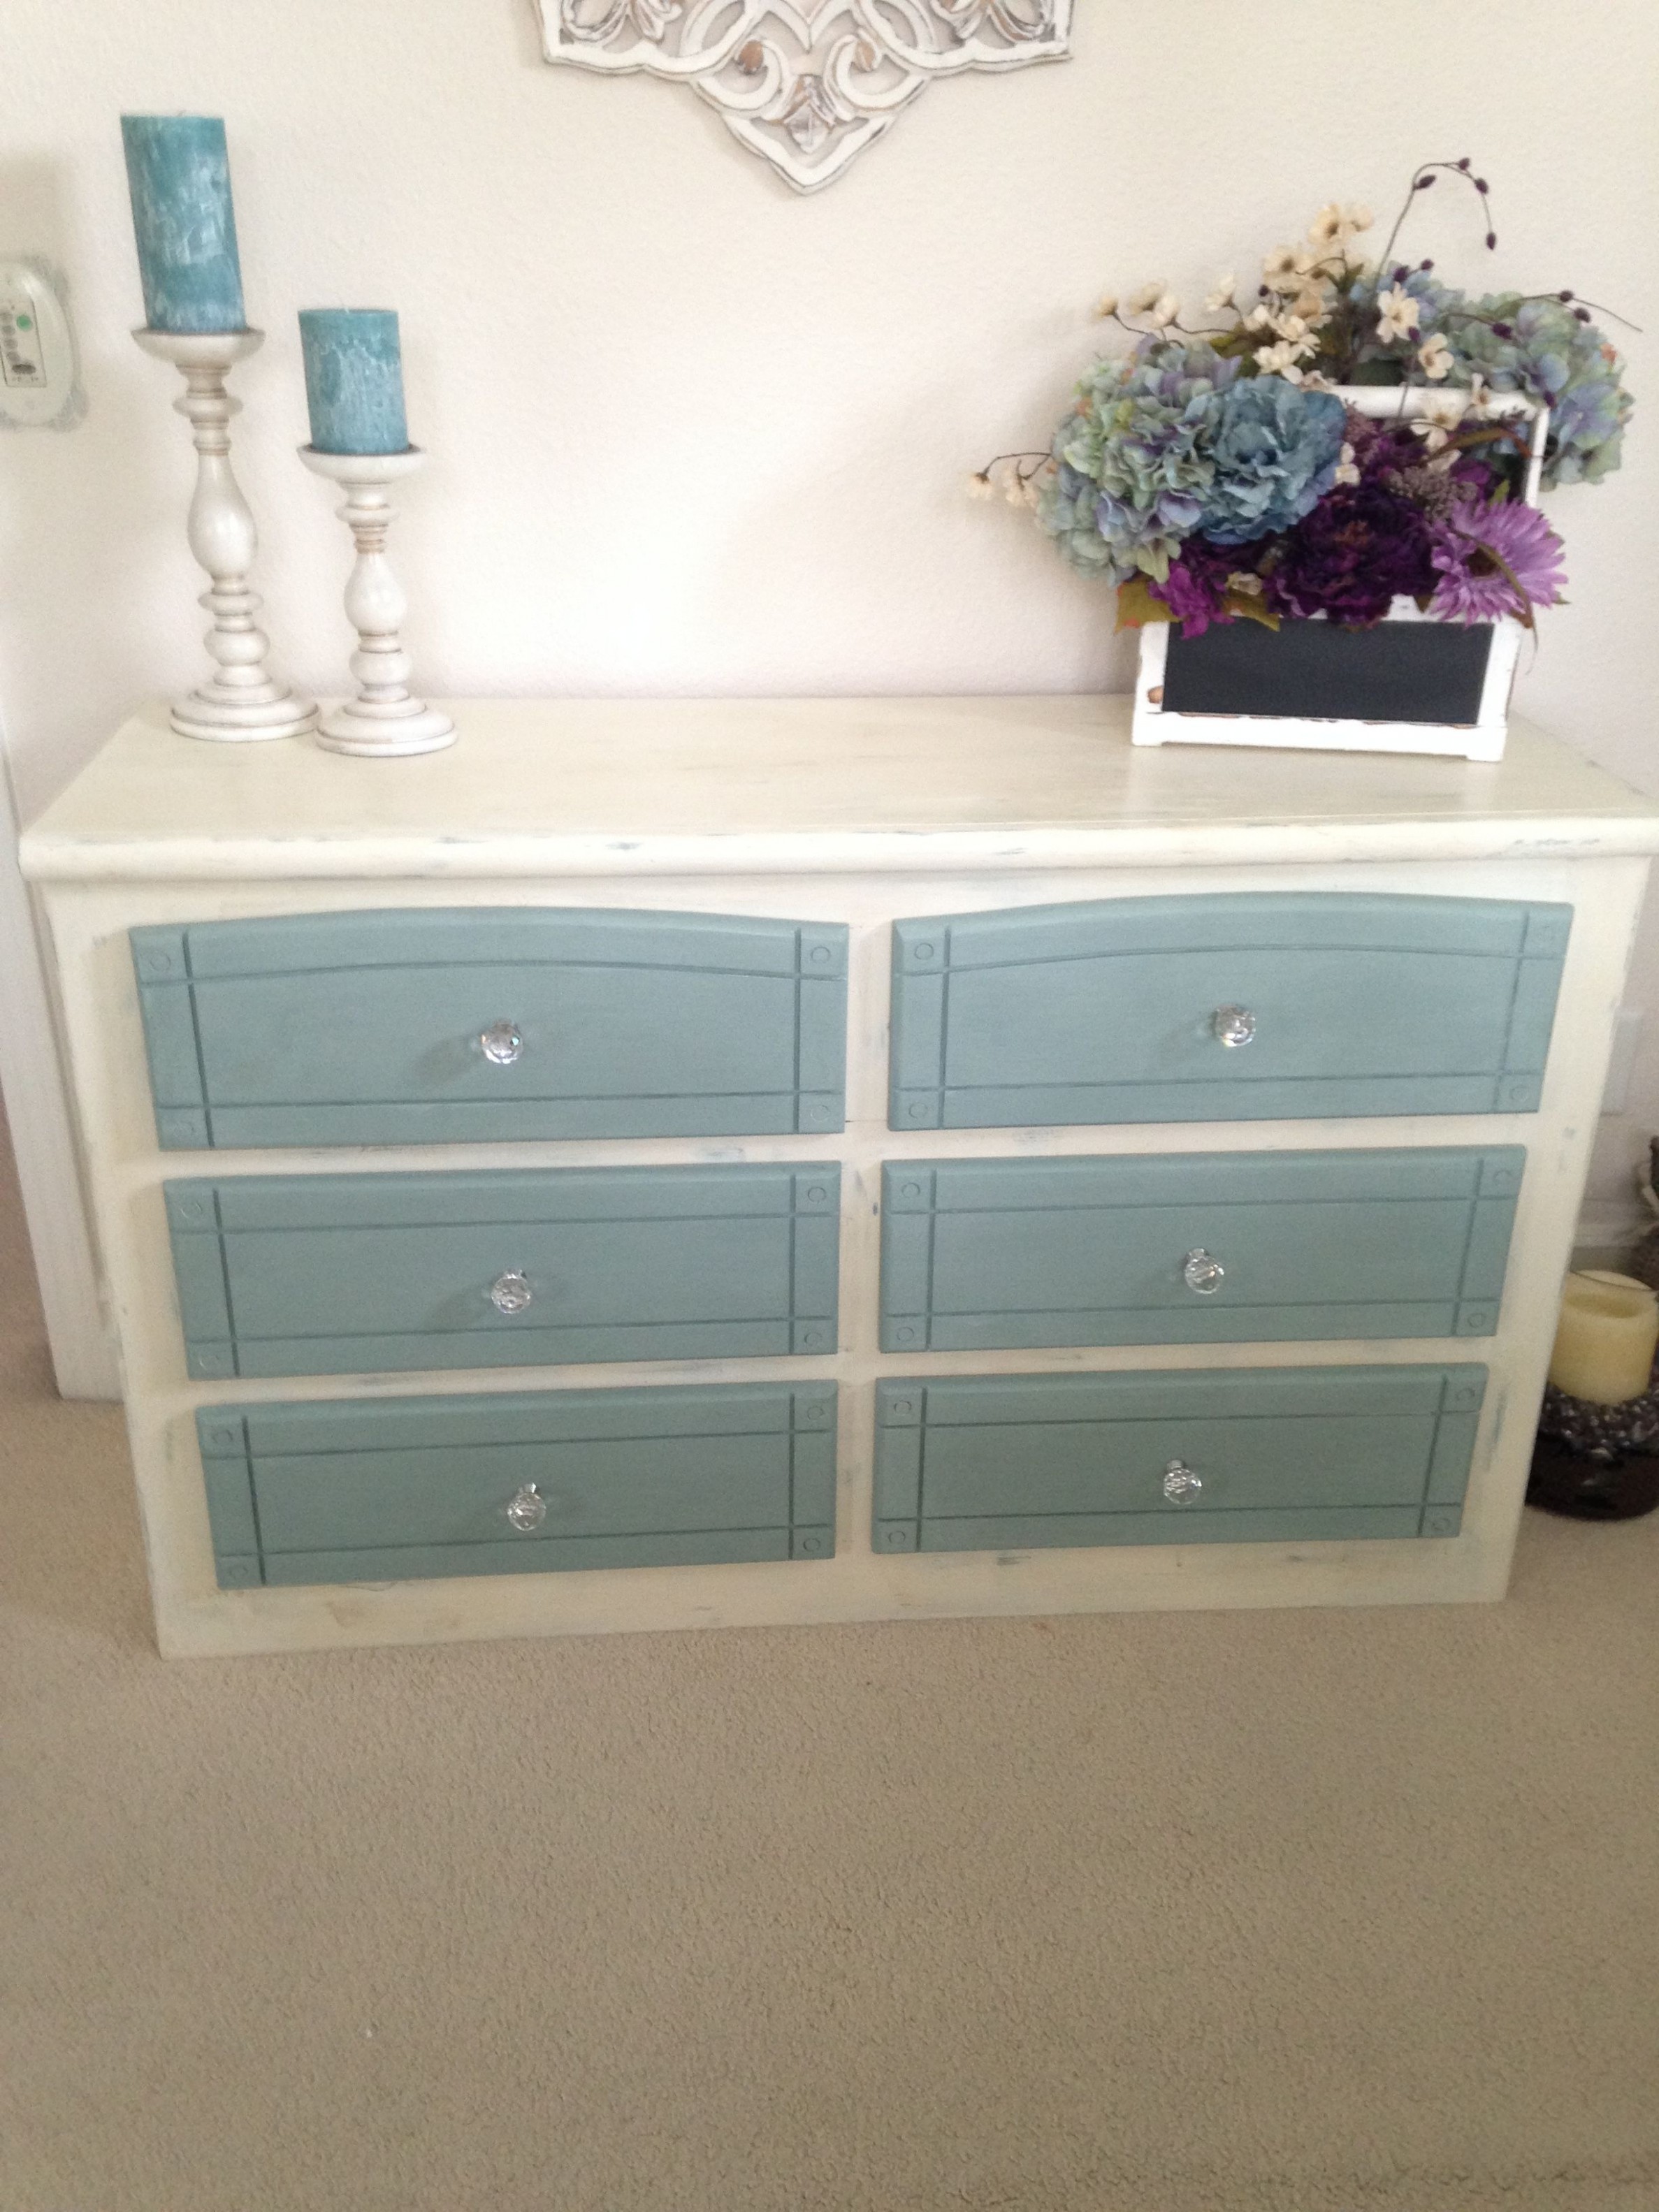 Chalk Painted Furniture With Annie Sloan Paint Duck Egg Blue ..